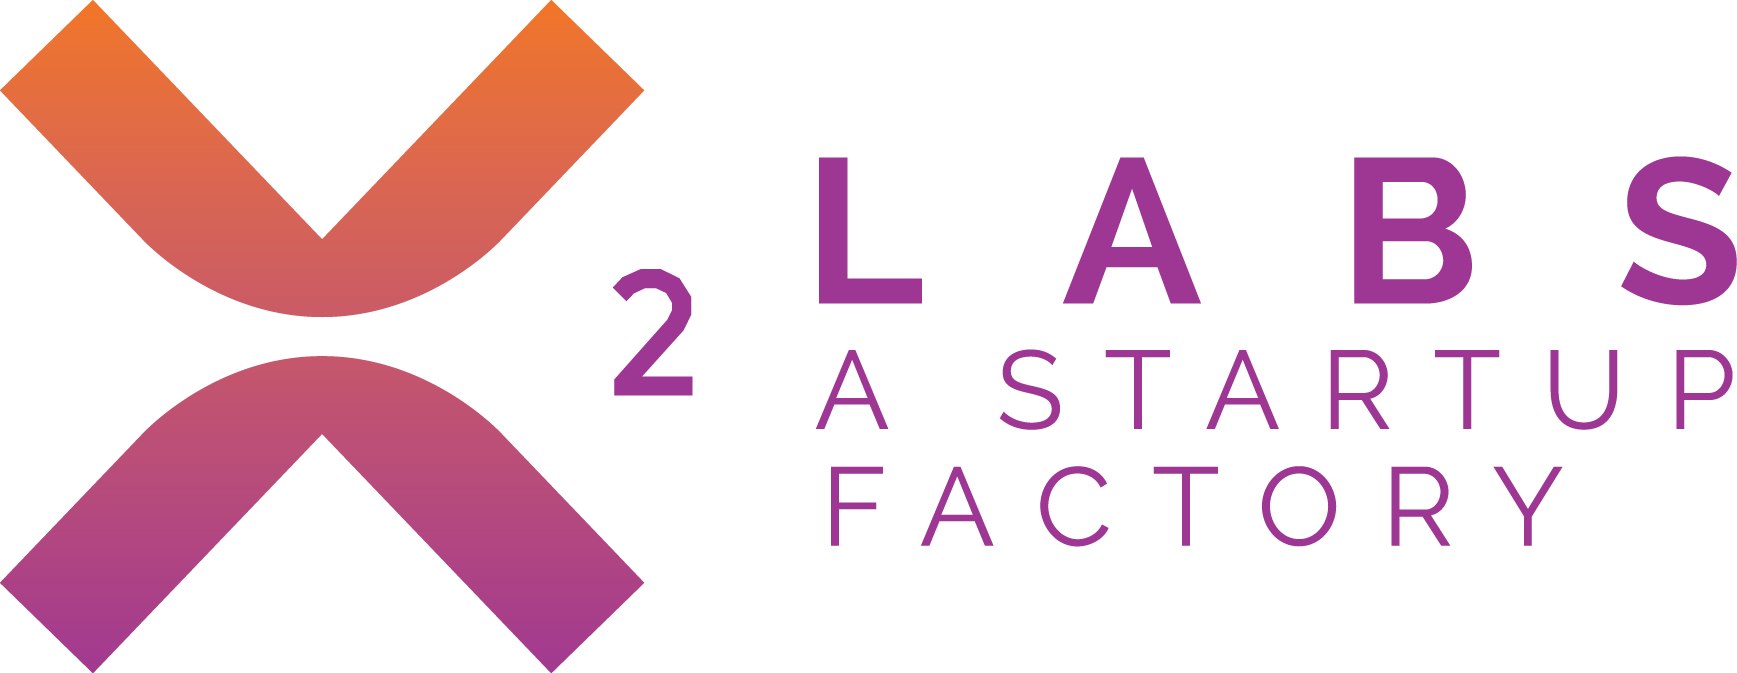 X2 Labs - A Startup Factory